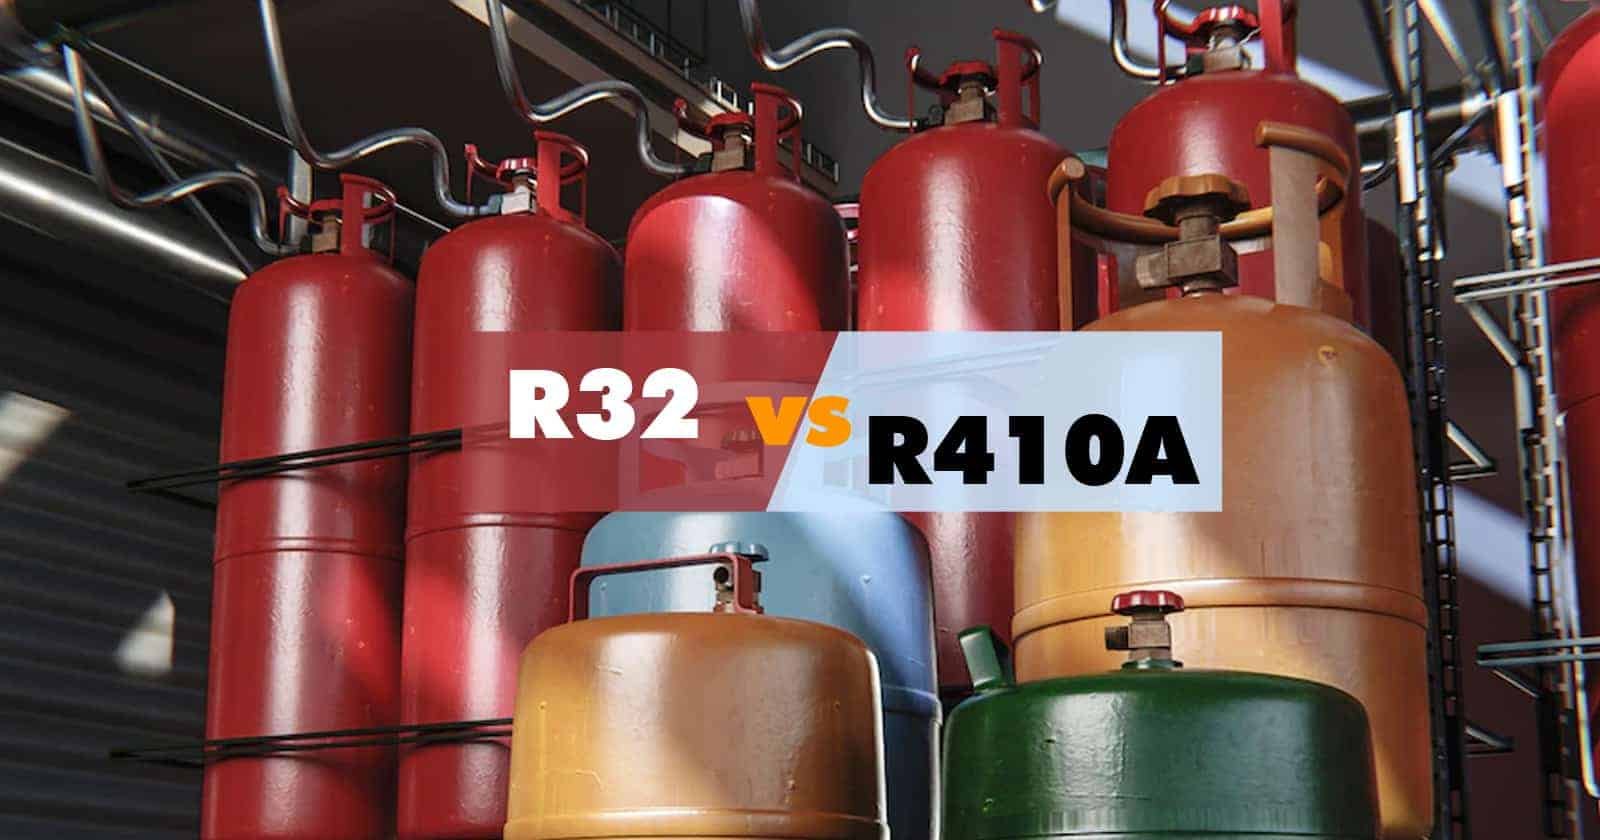 difference between R32 and R410A